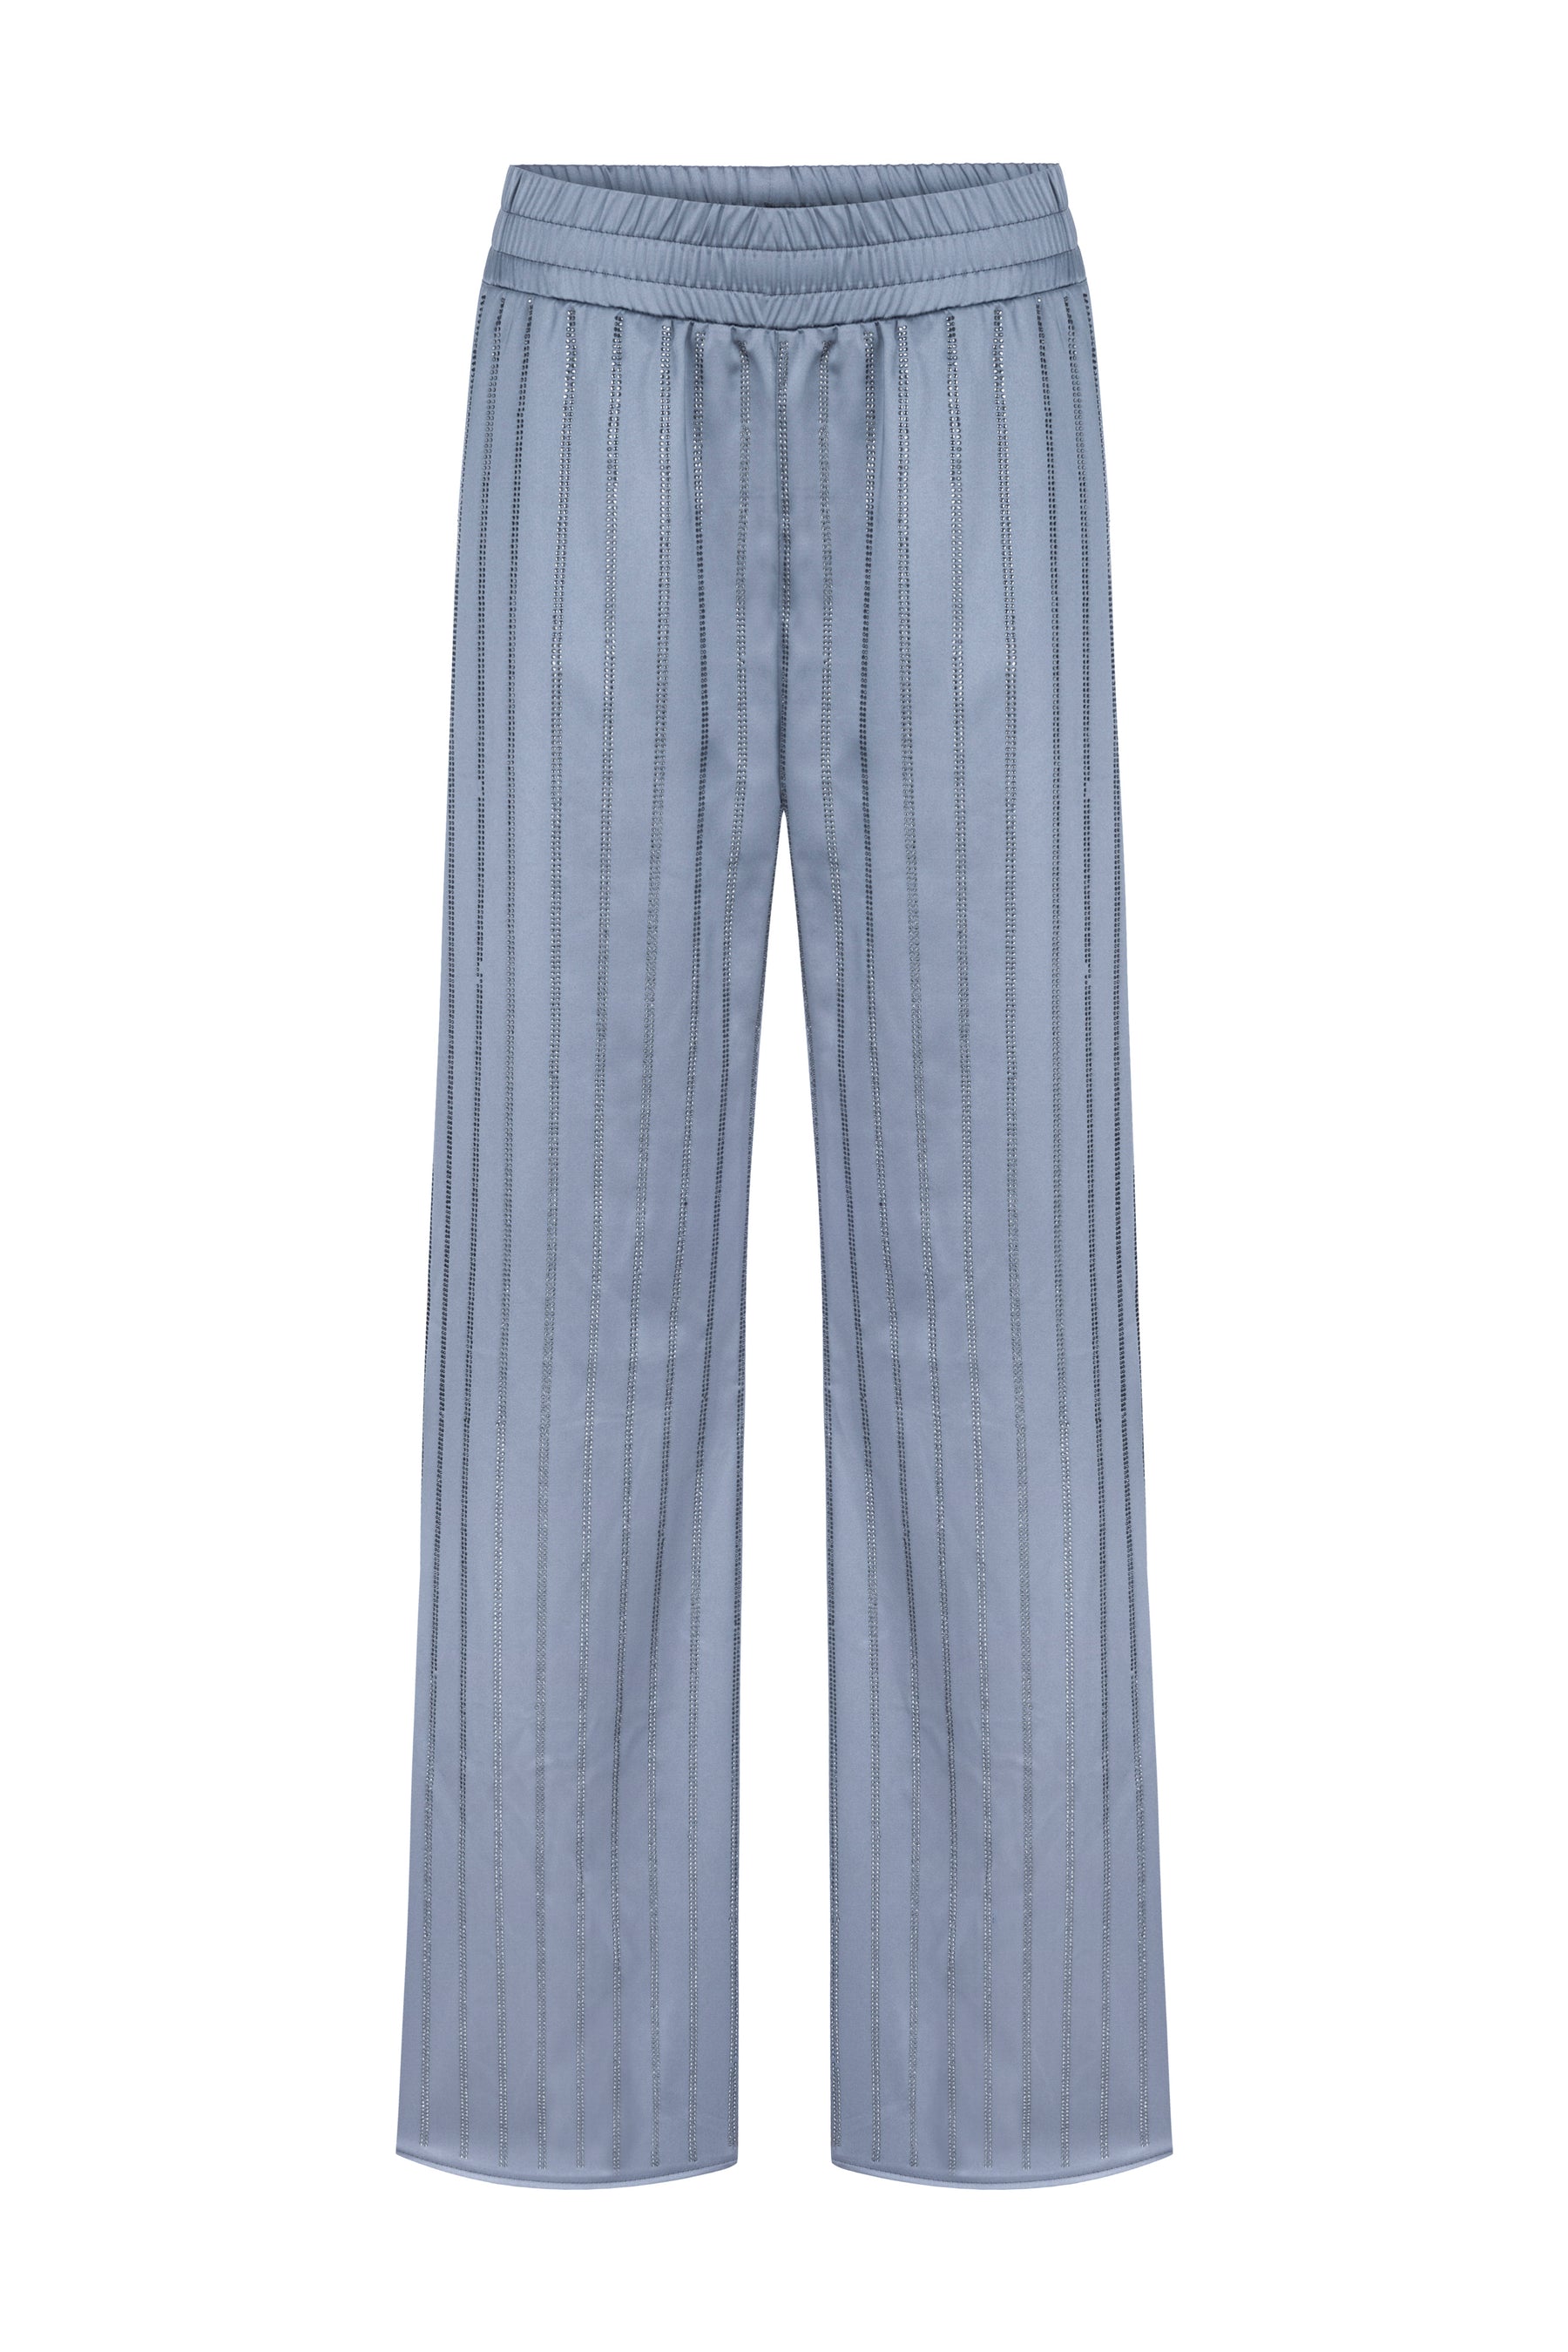 Luminescent Pant in Gray